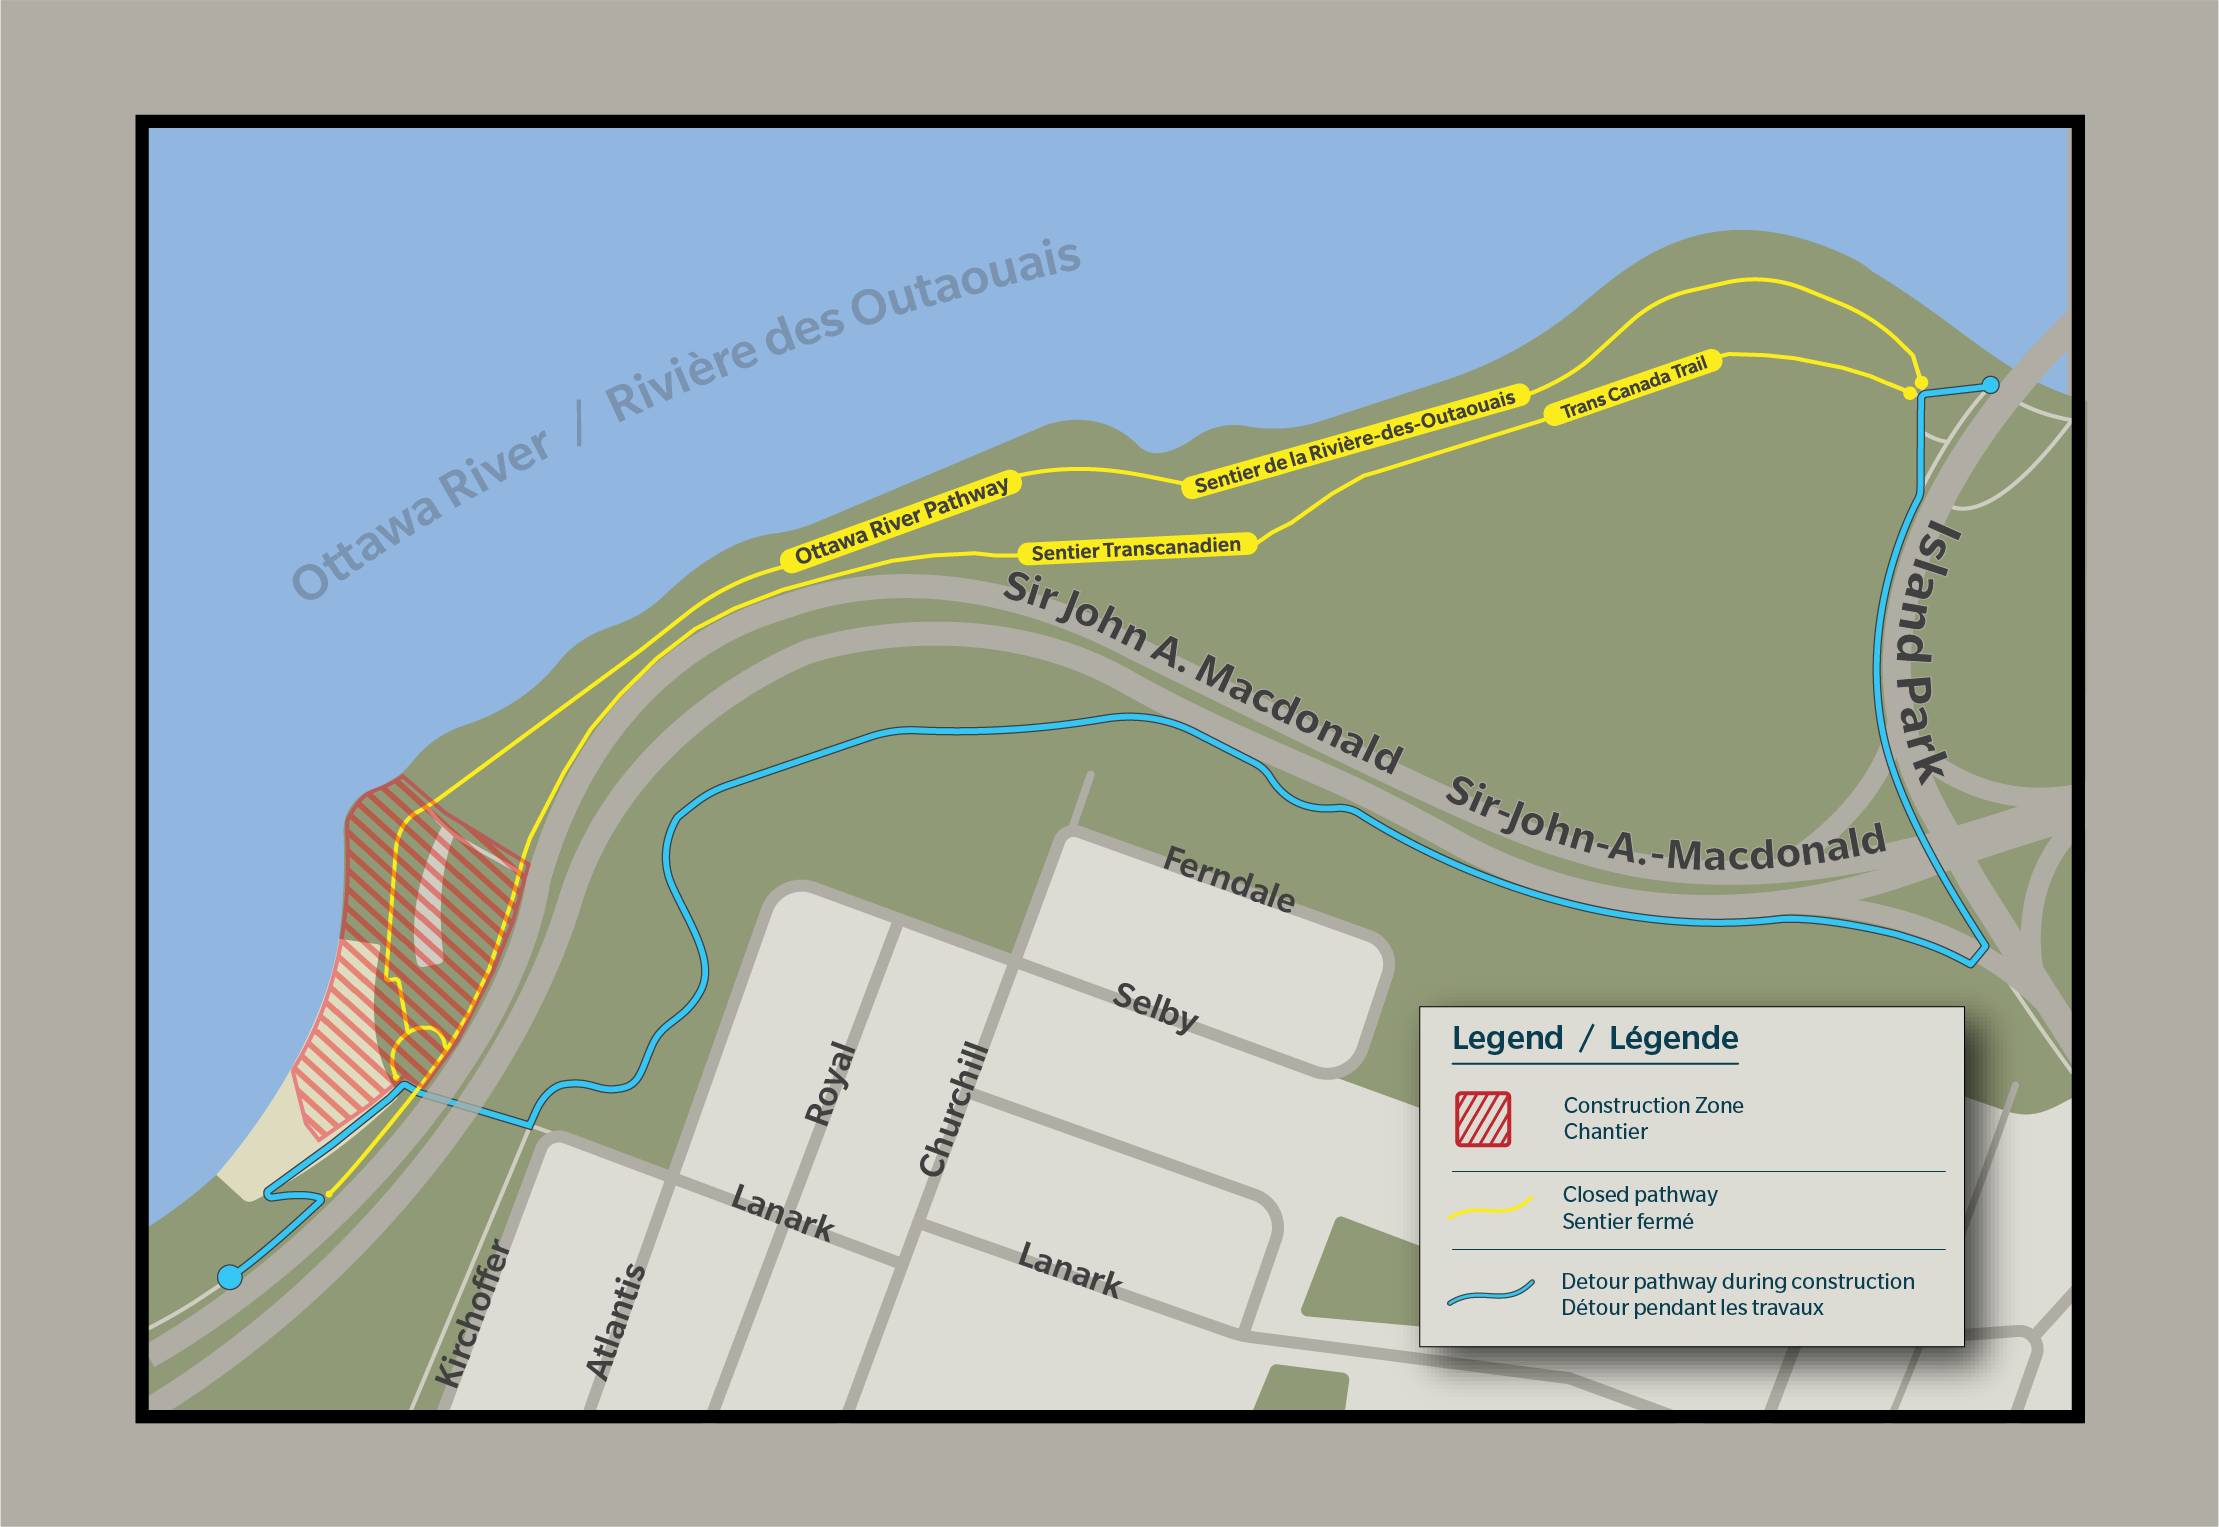 Map of the Westboro Beach area, showing construction zone, closed pathways, and detours.